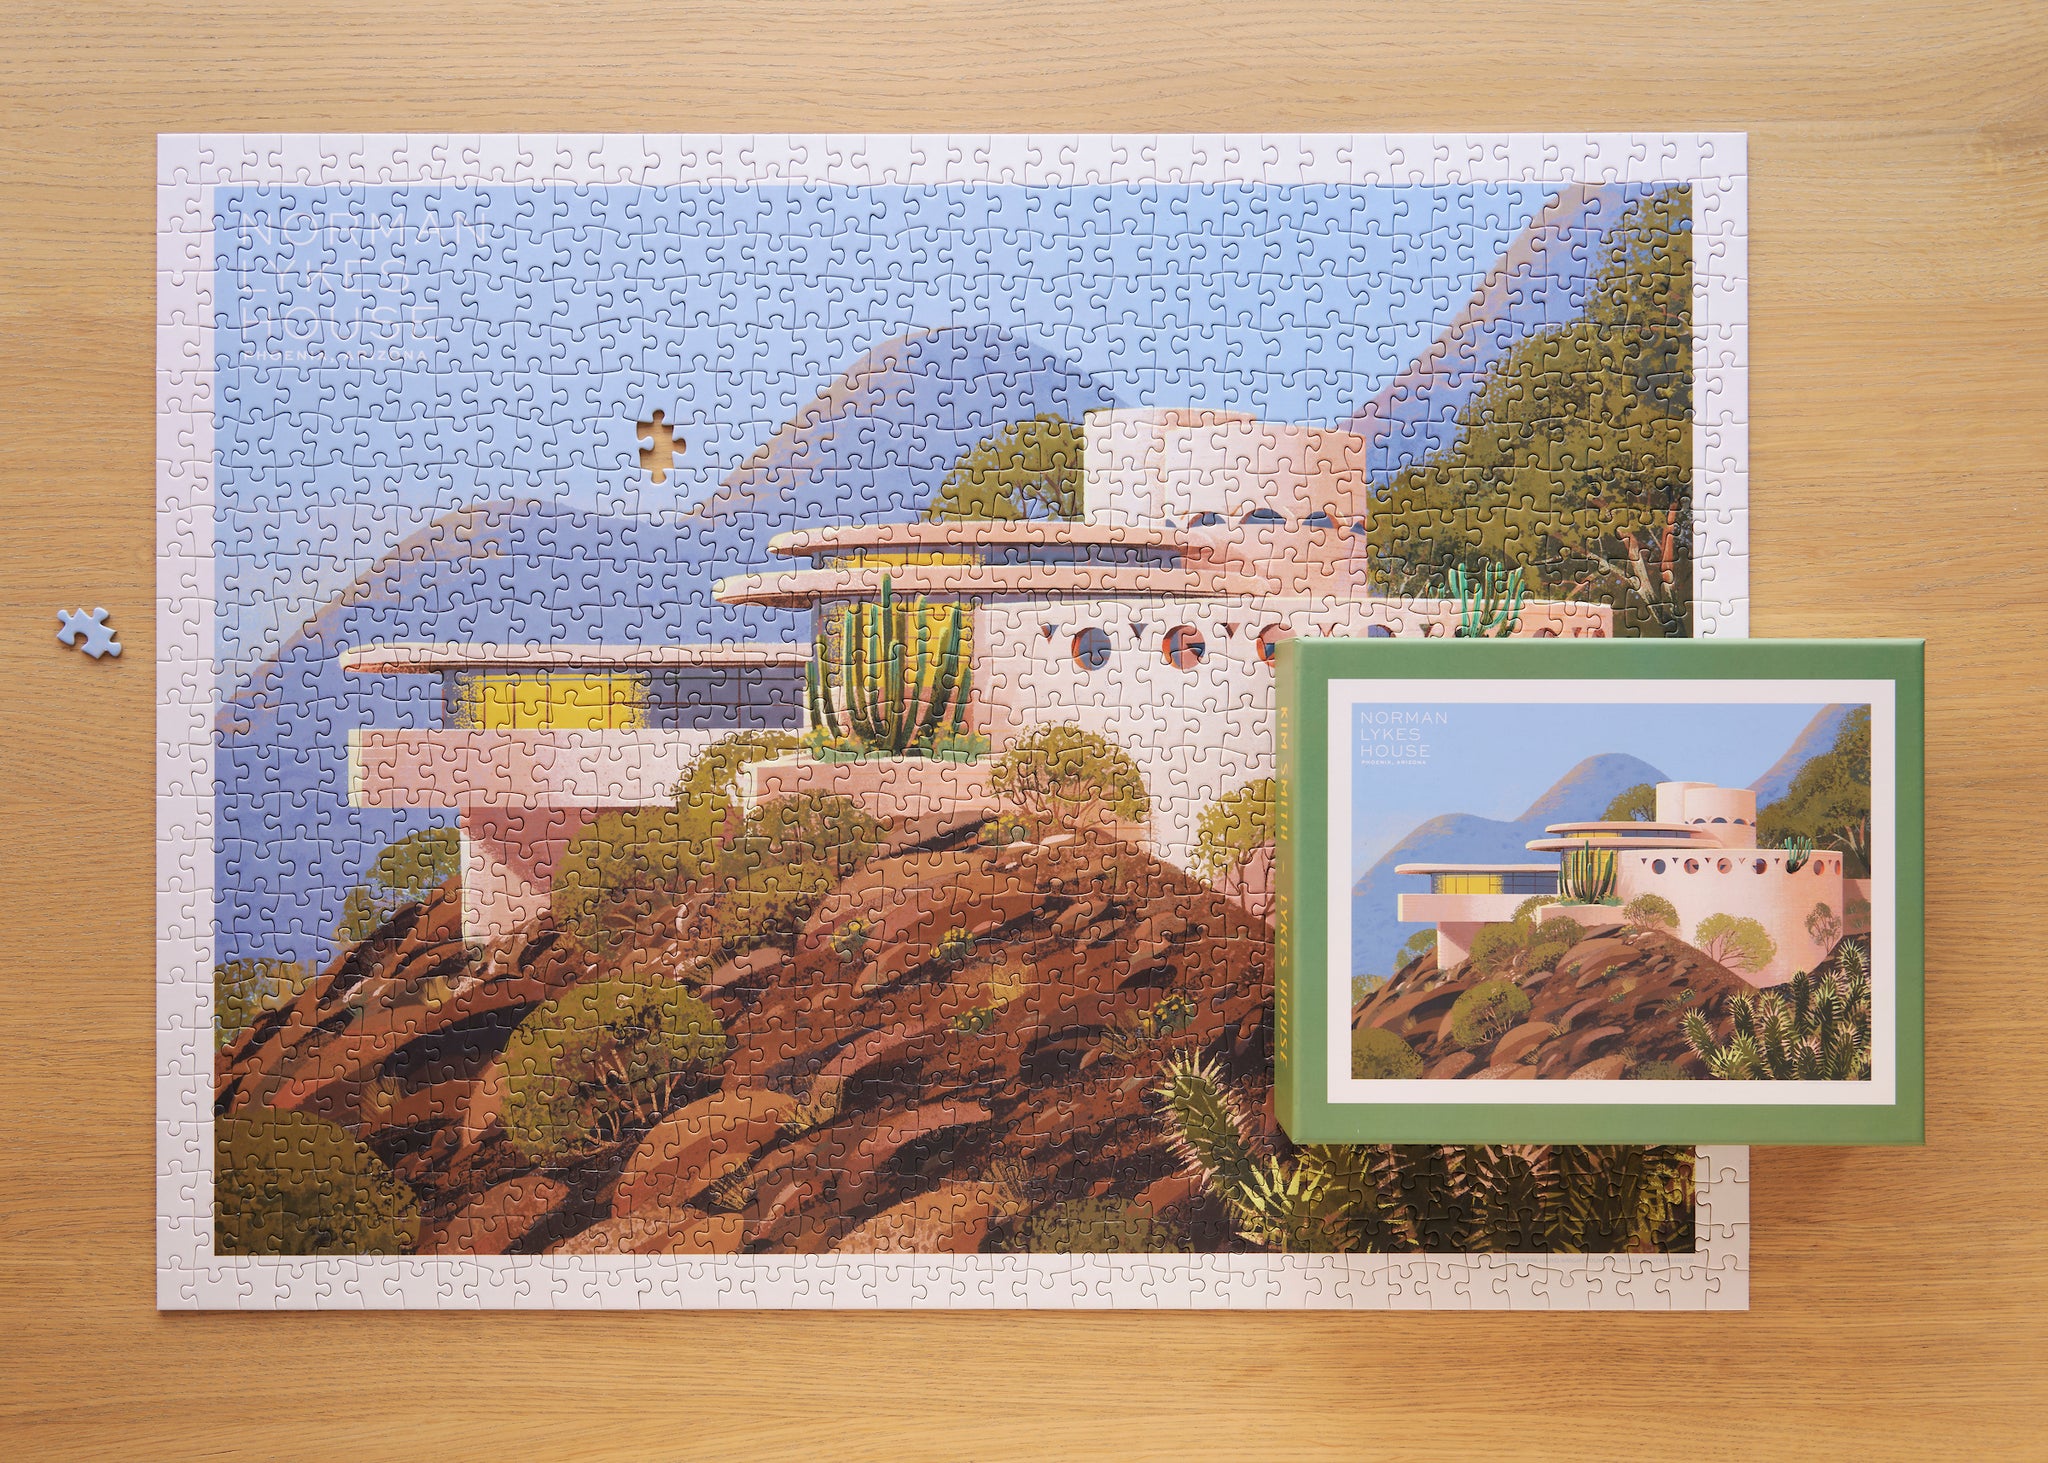 Frank Lloyd Wright Collection: Norman Lykes House Puzzle